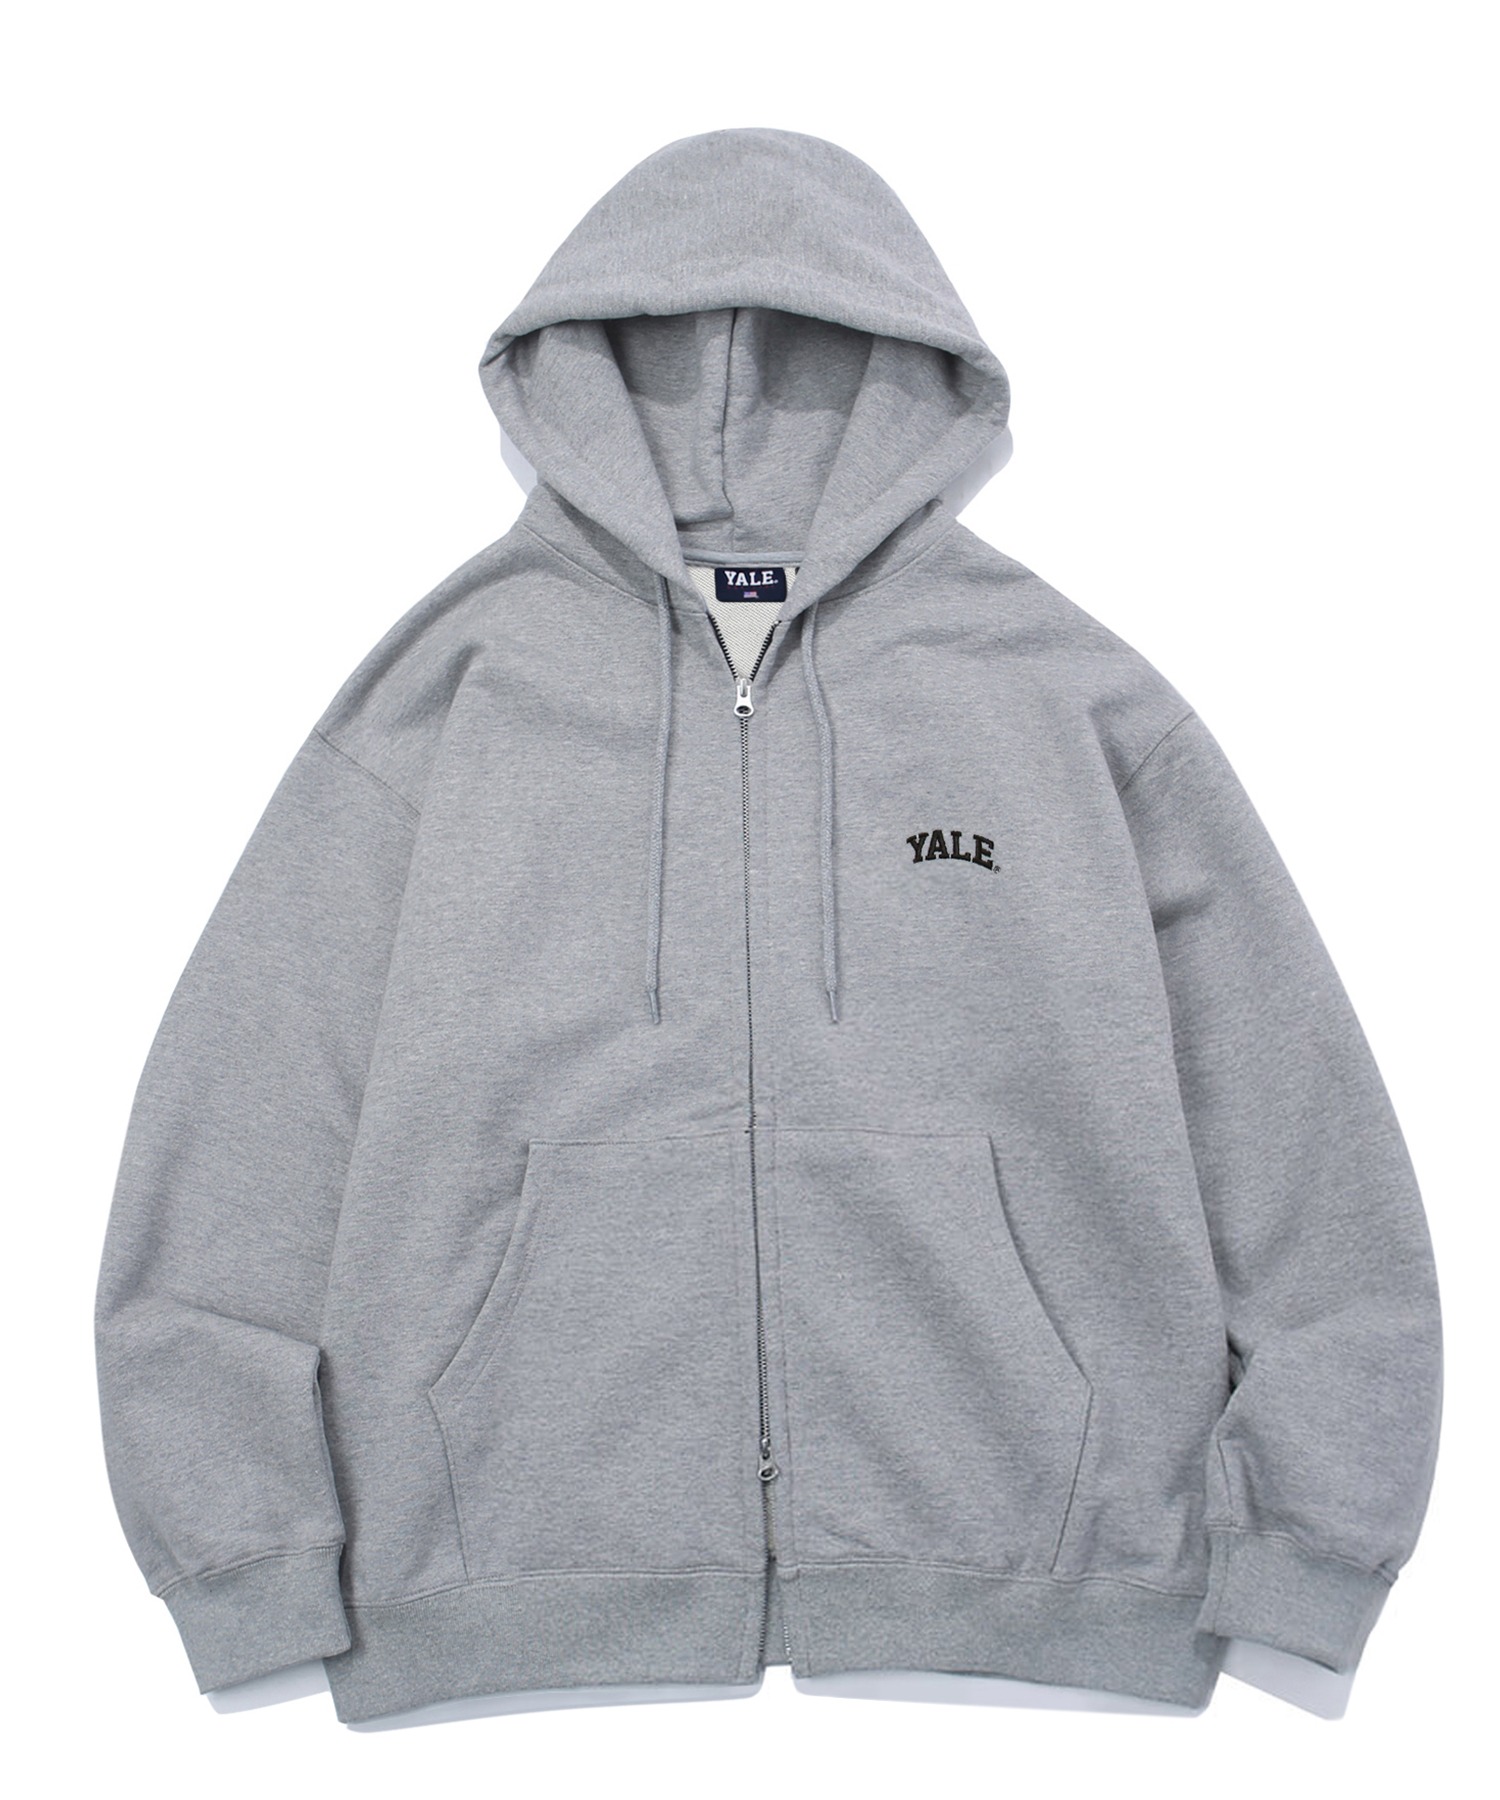 [ONEMILE WEAR] SMALL ARCH LOGO HOODIE ZIP UP GRAY